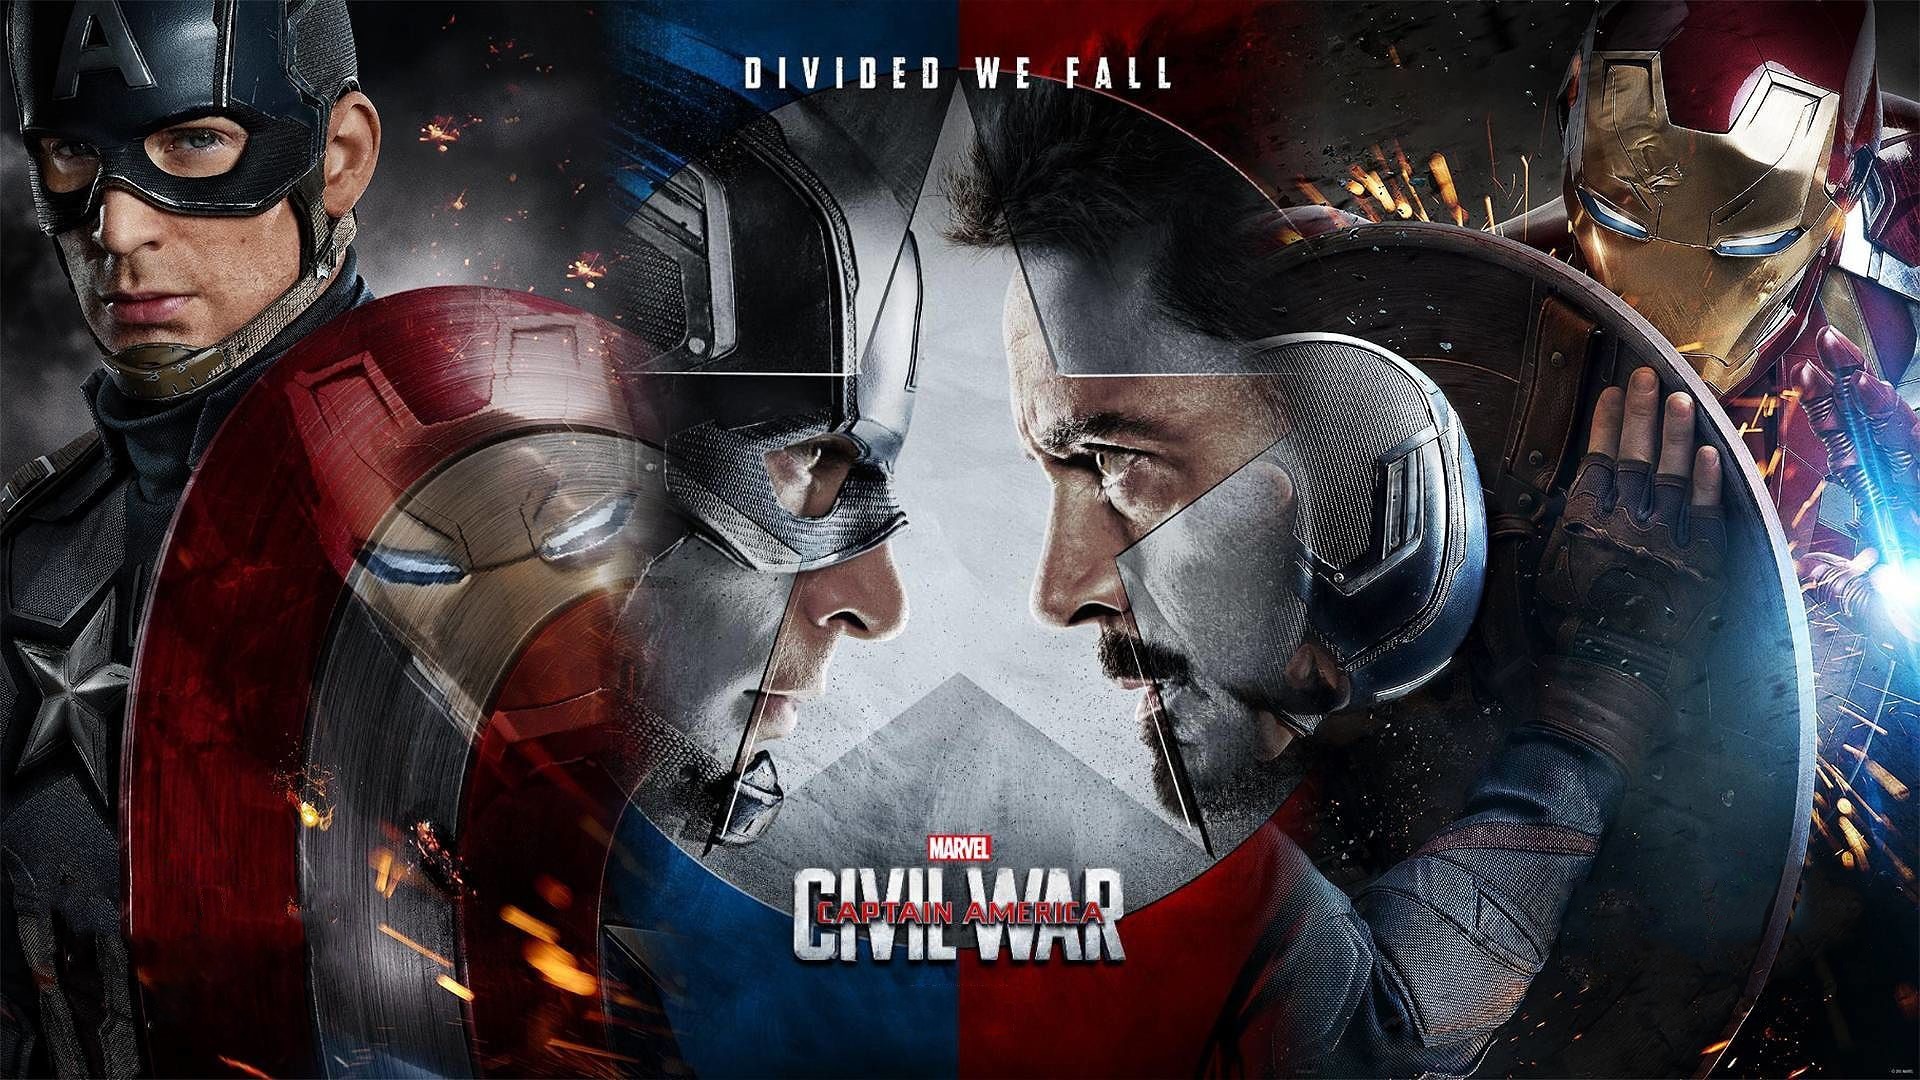 1920x1080 Team 'Captain America: Civil War' Movie and Character Posters revealed Team  Ironman: Civil War Short on Spiderman captain-america- ...